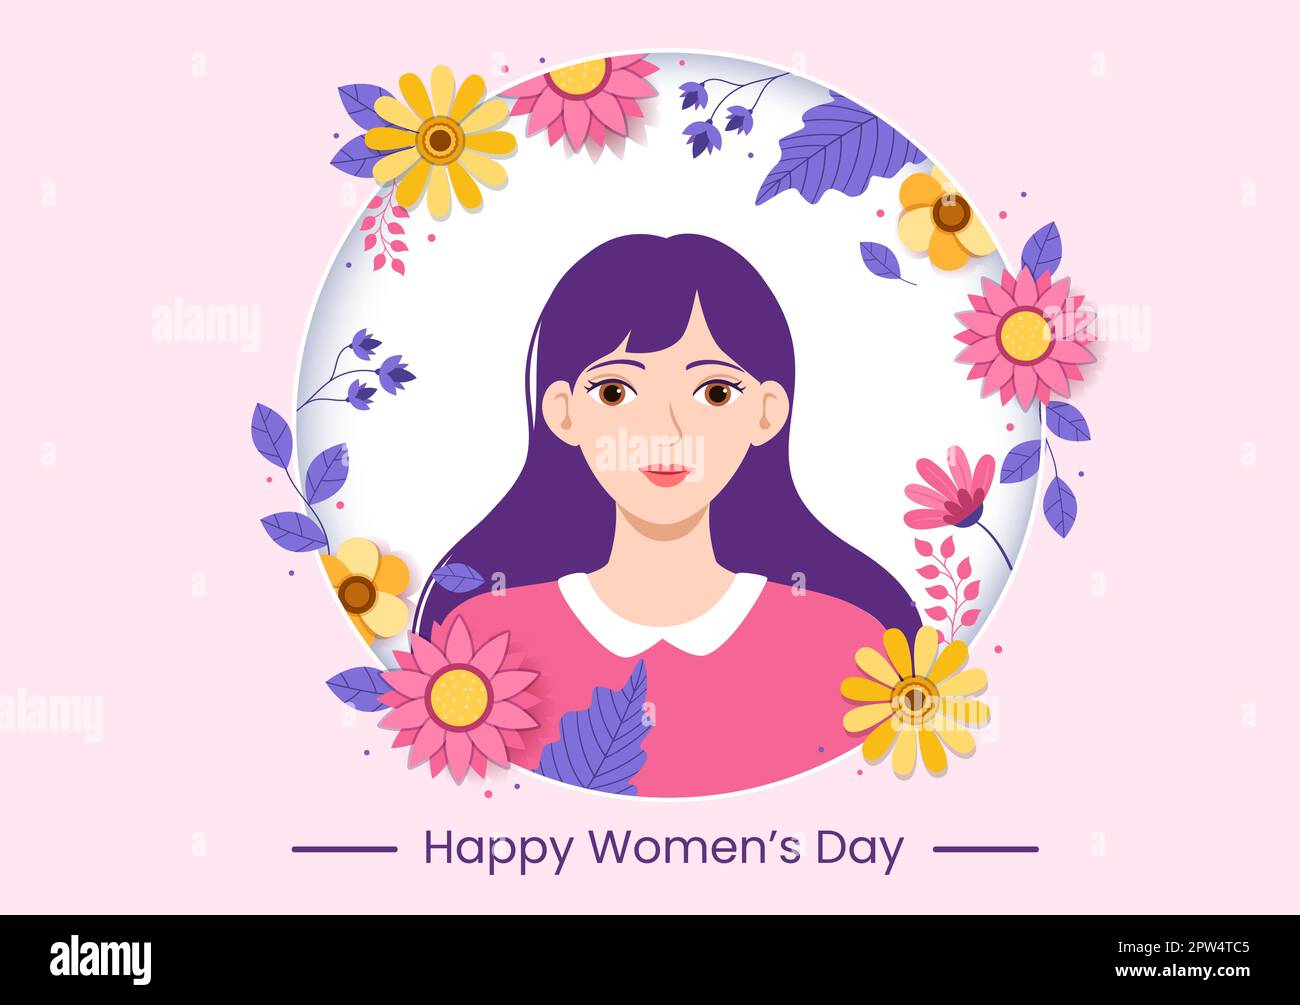 International Women's Day on March 8 Illustration to Celebrate the Achievements of Women in Flat Cartoon Hand Drawn Landing Page Templates Stock Vector